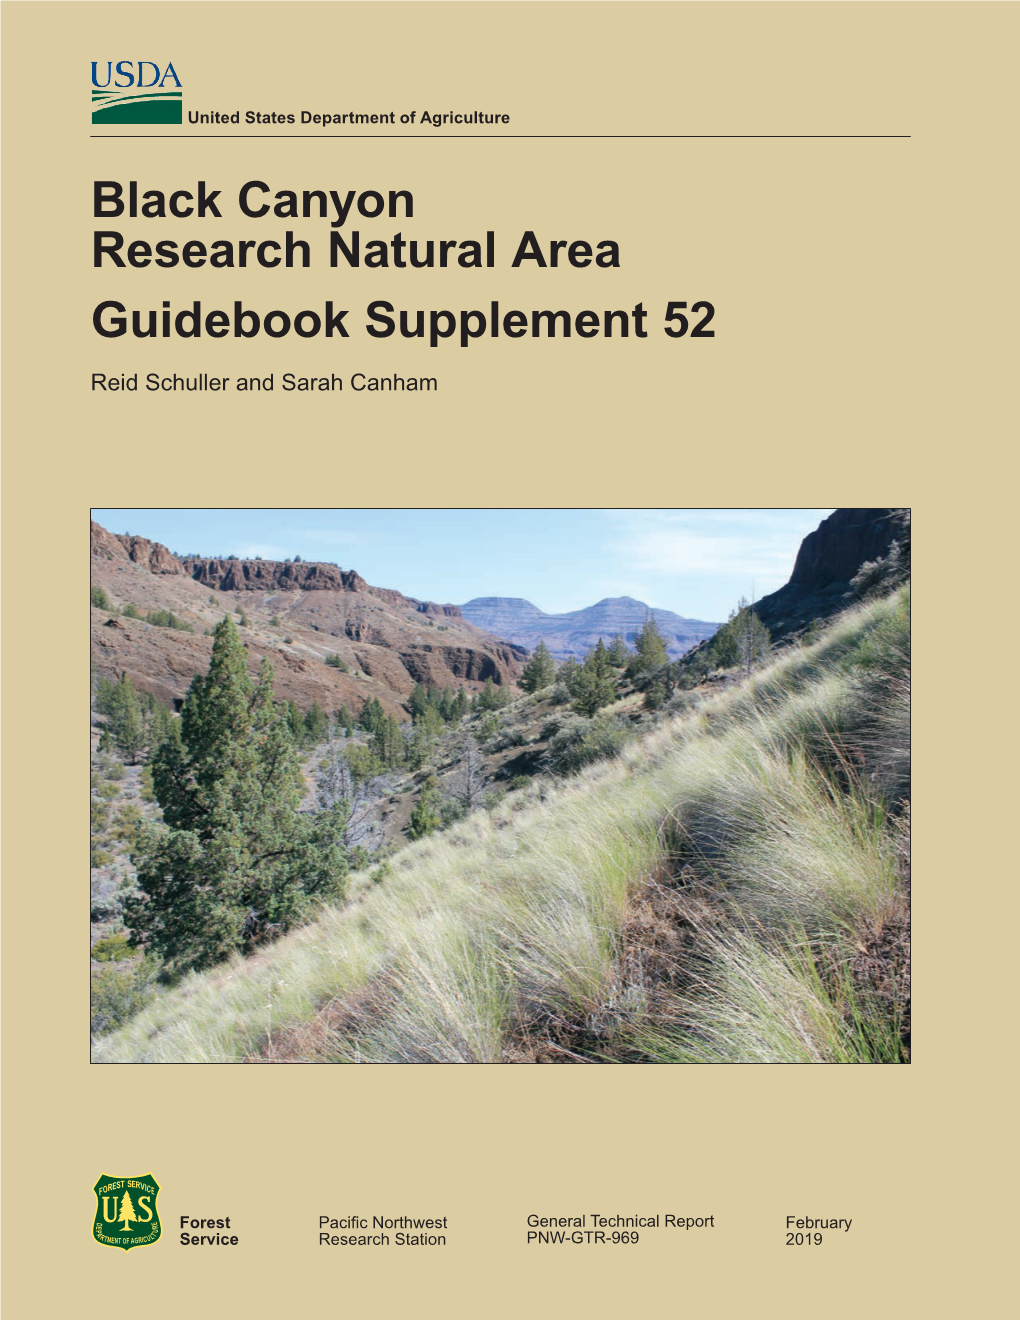 Black Canyon Research Natural Area Guidebook Supplement 52 Reid Schuller and Sarah Canham